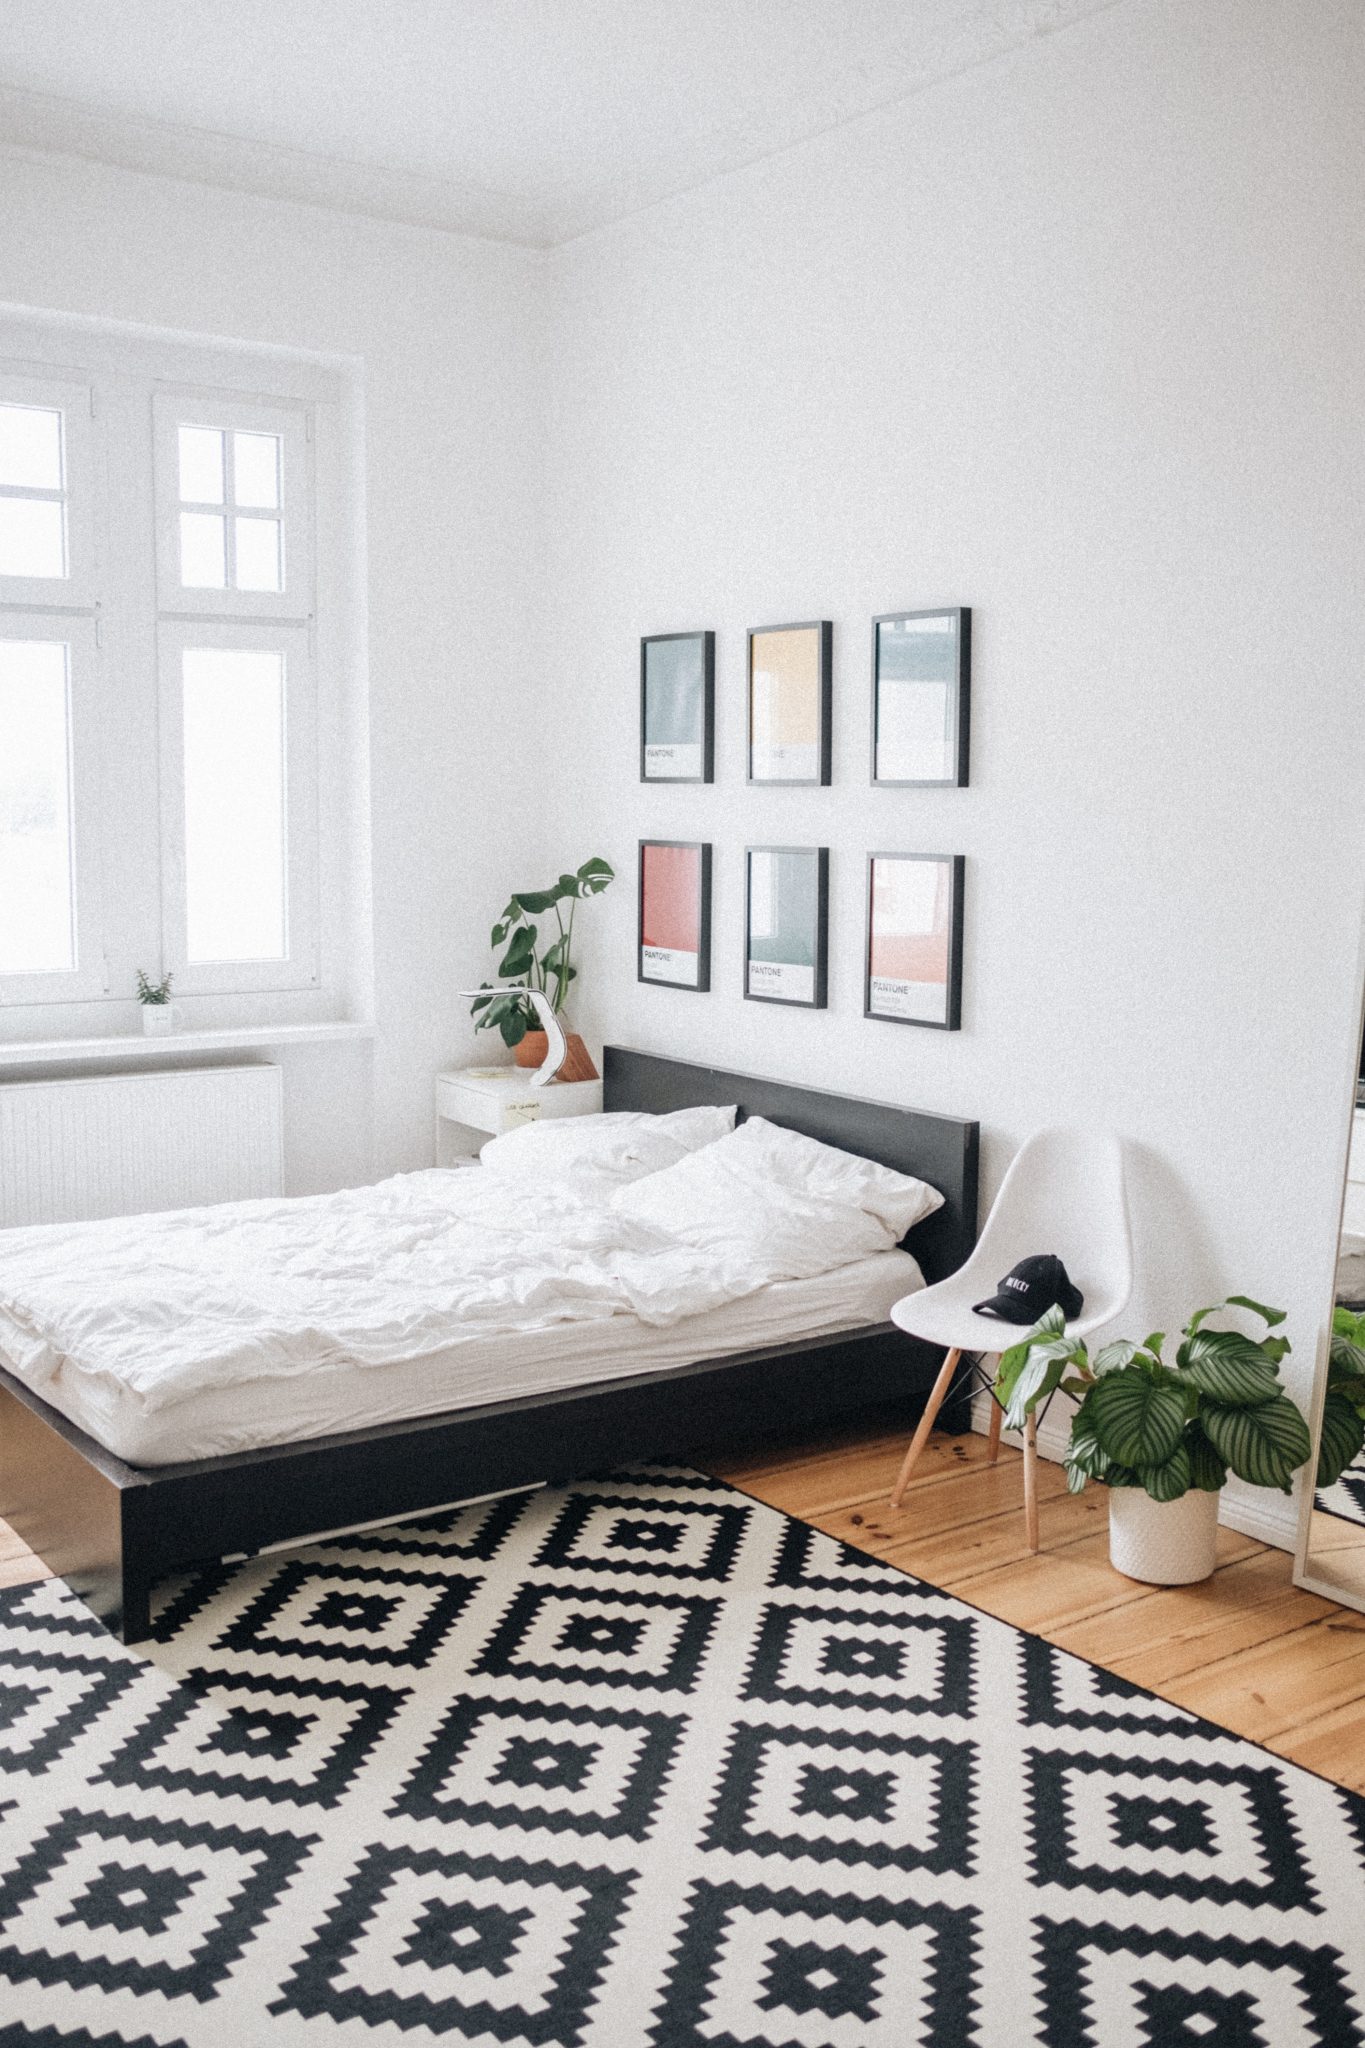 Minimalist Apartment on a Budget: Tips for Simplifying Your Space Without Breaking the Bank